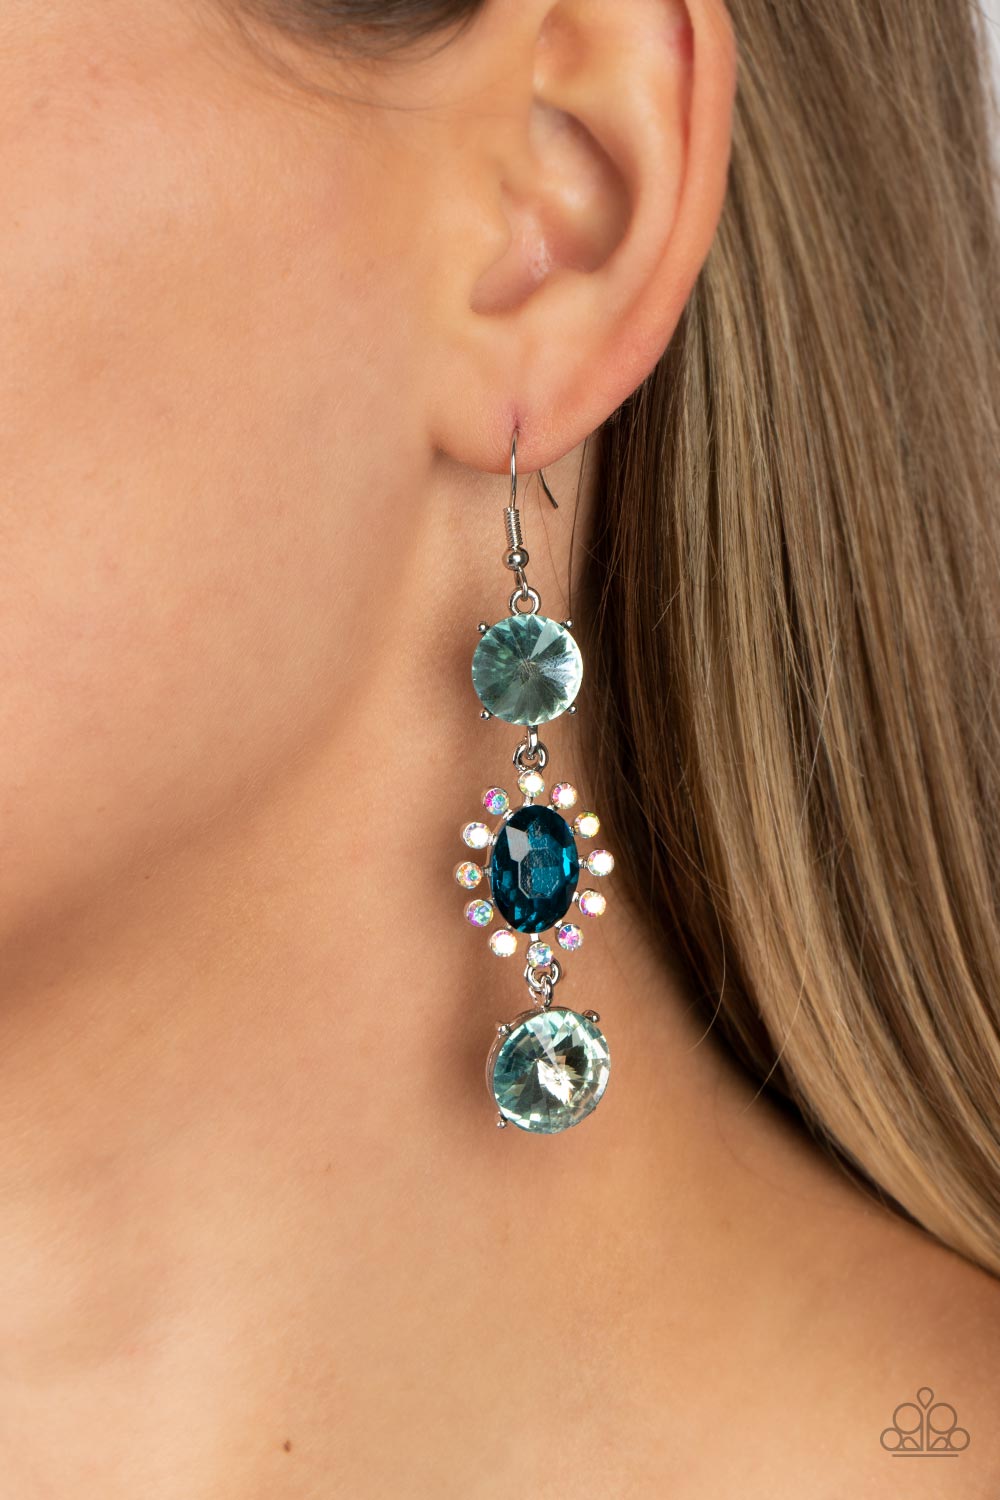 Magical Melodrama Blue Iridescent Rhinestone Earrings - Paparazzi Accessories-on model - CarasShop.com - $5 Jewelry by Cara Jewels